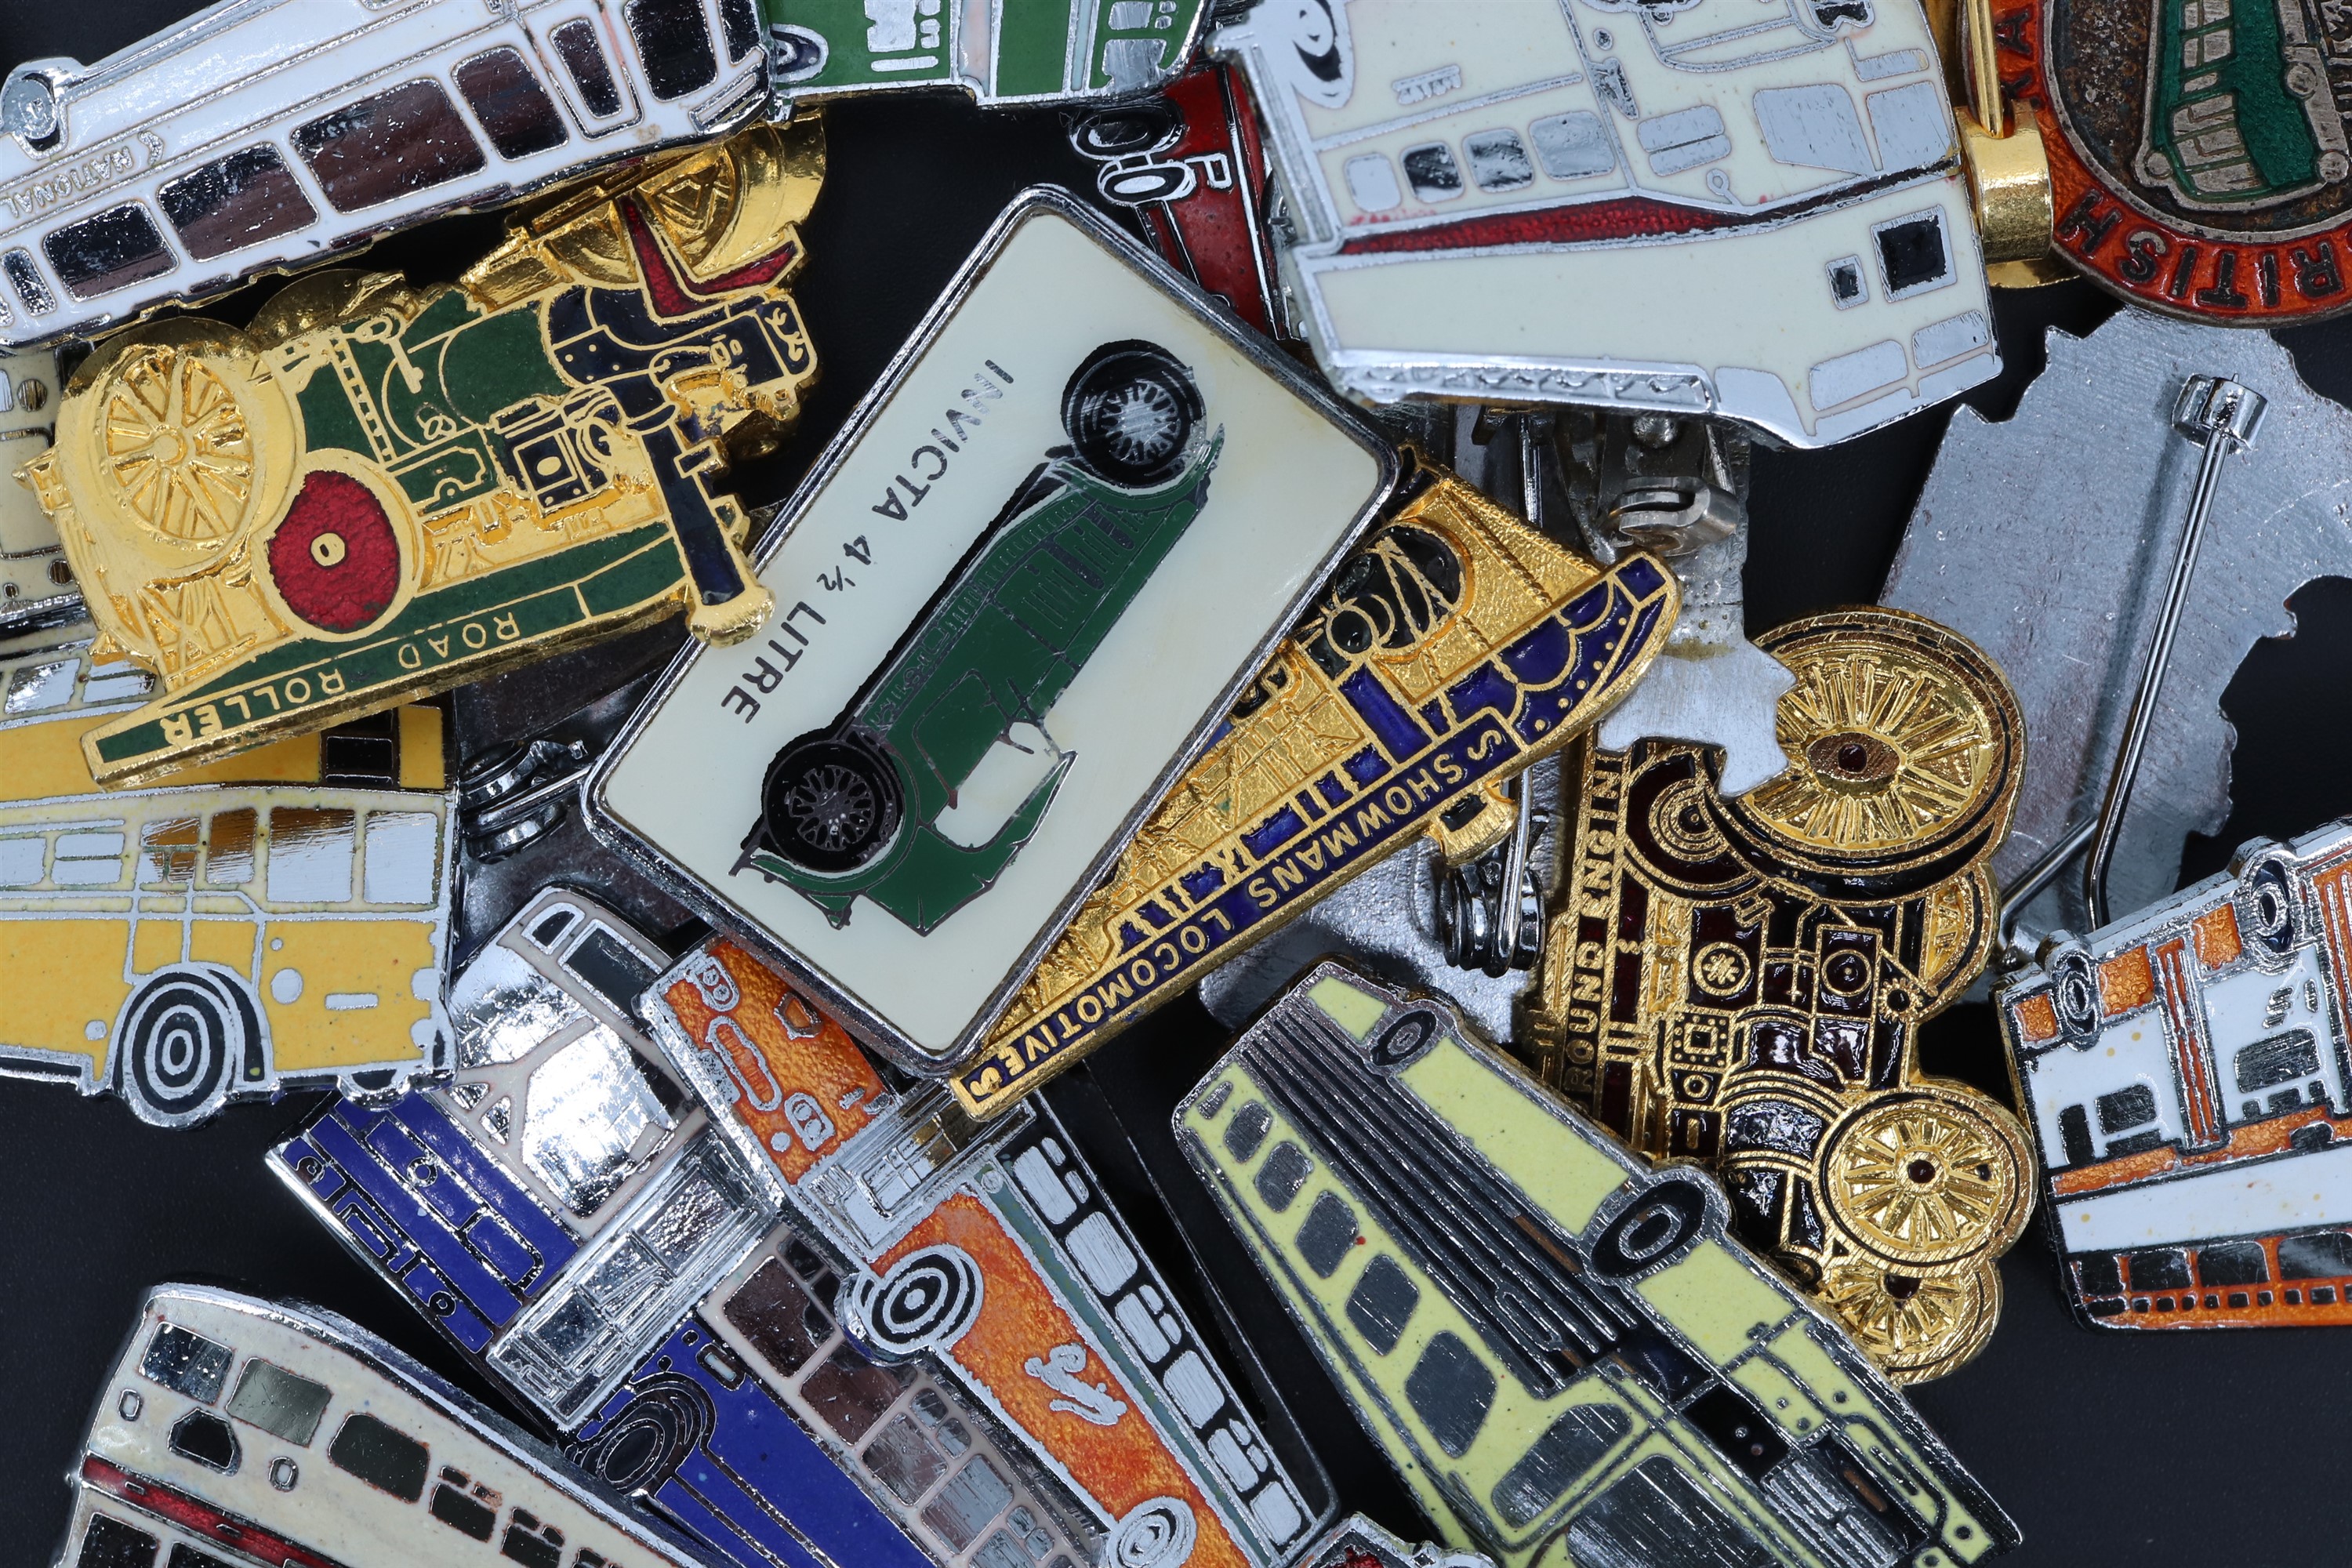 A collection of transport-related lapel badges, mid-to-late 20th Century